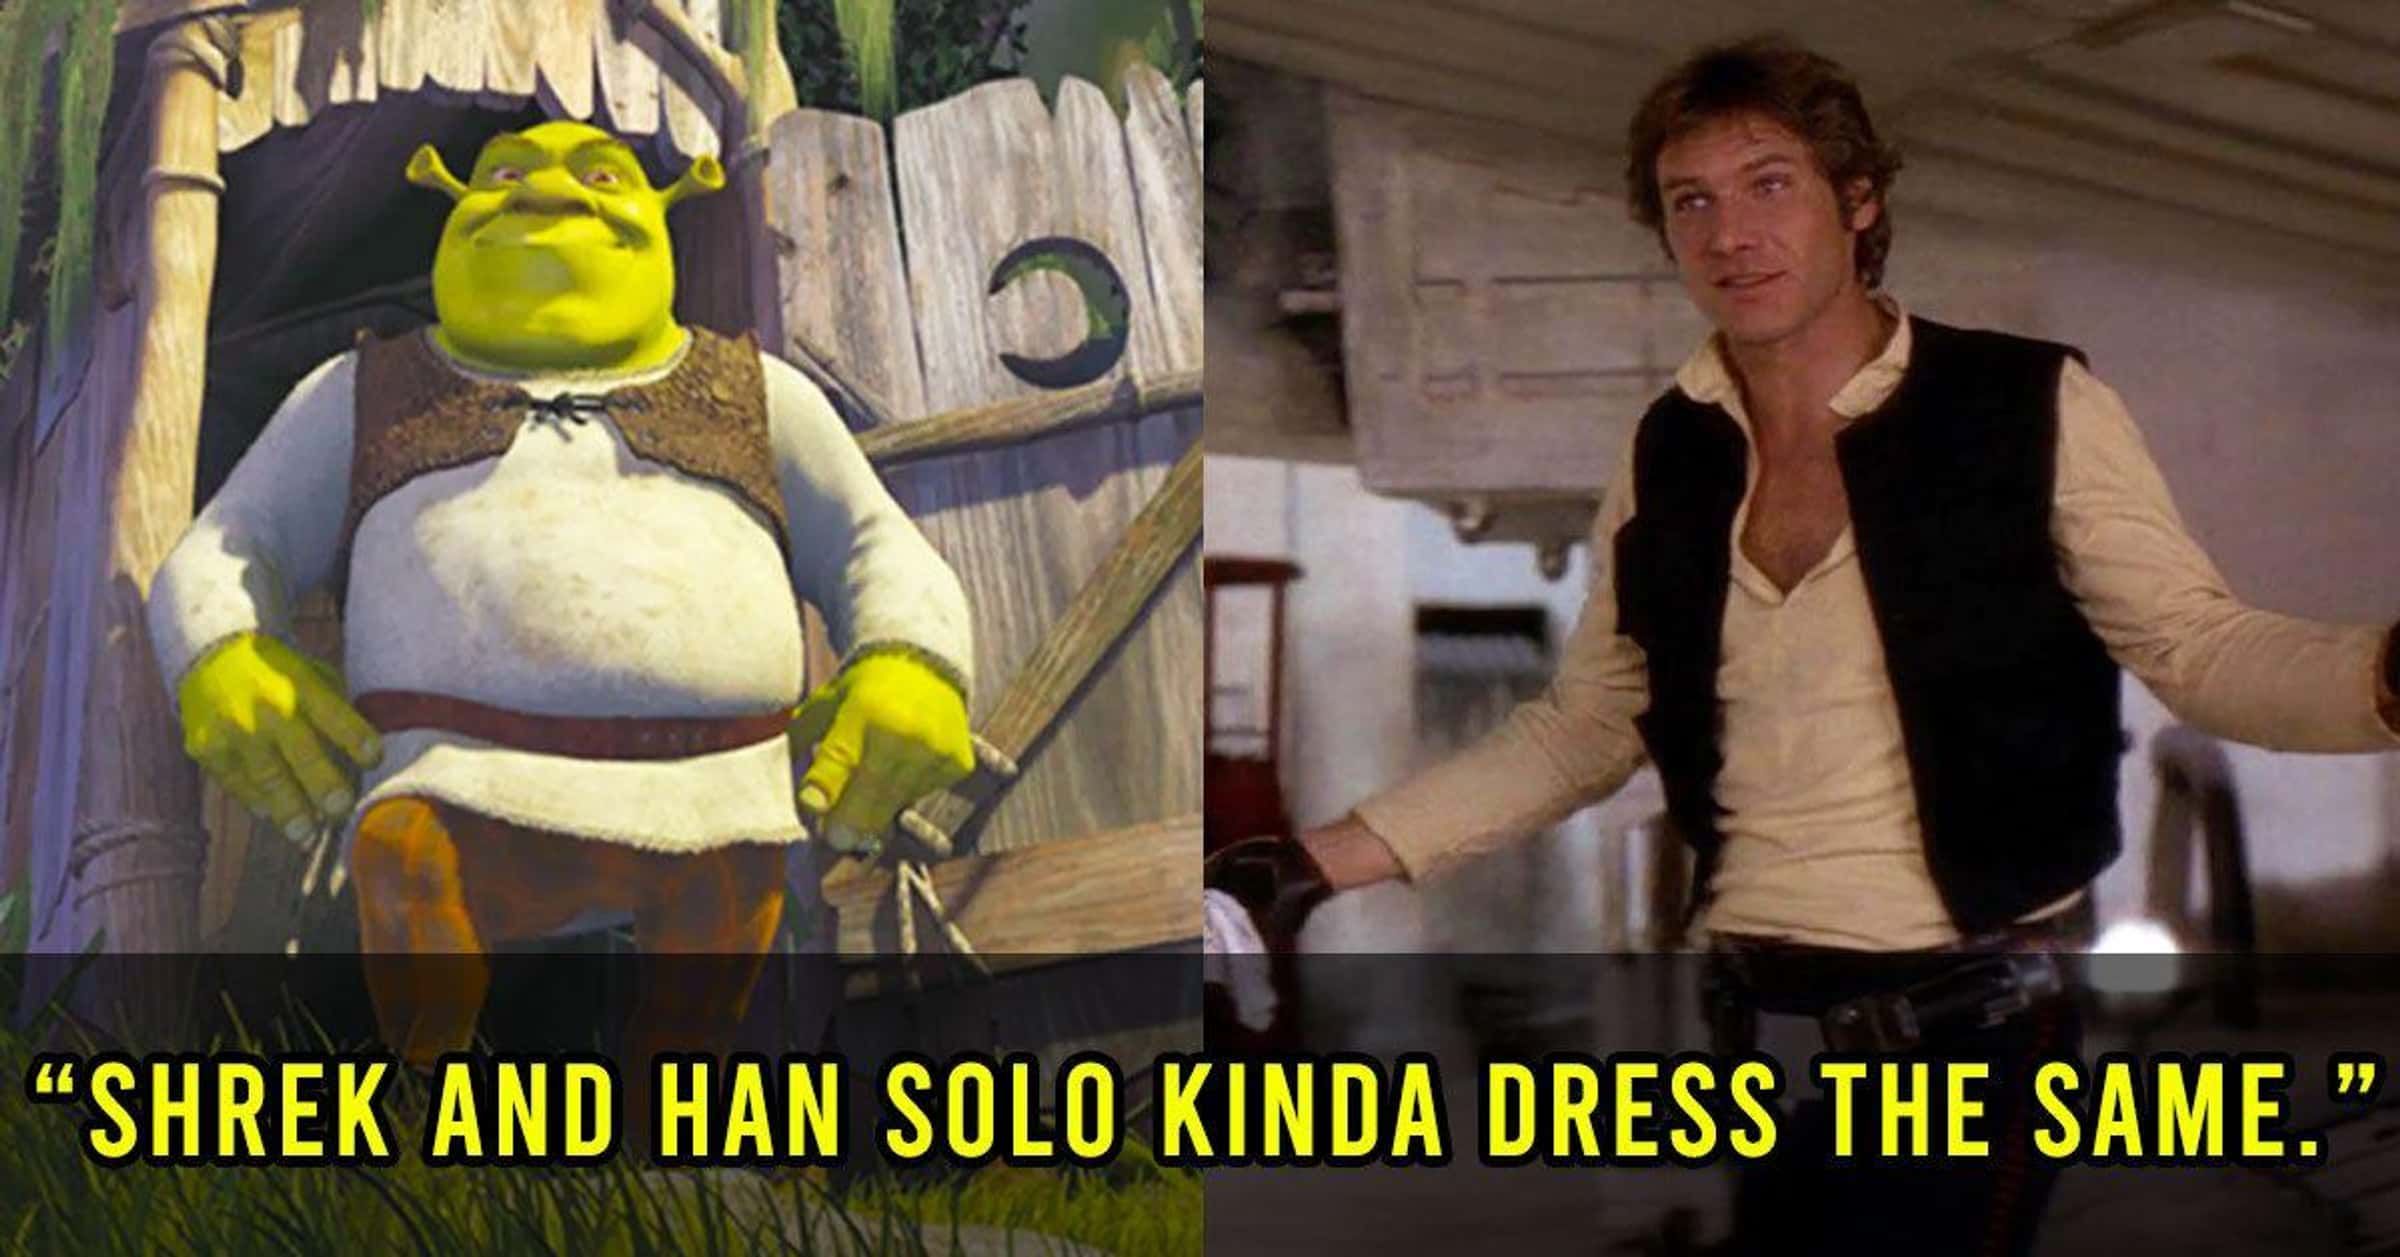 23 Weird 'Shrek' Thoughts That Actually Make A Good Point